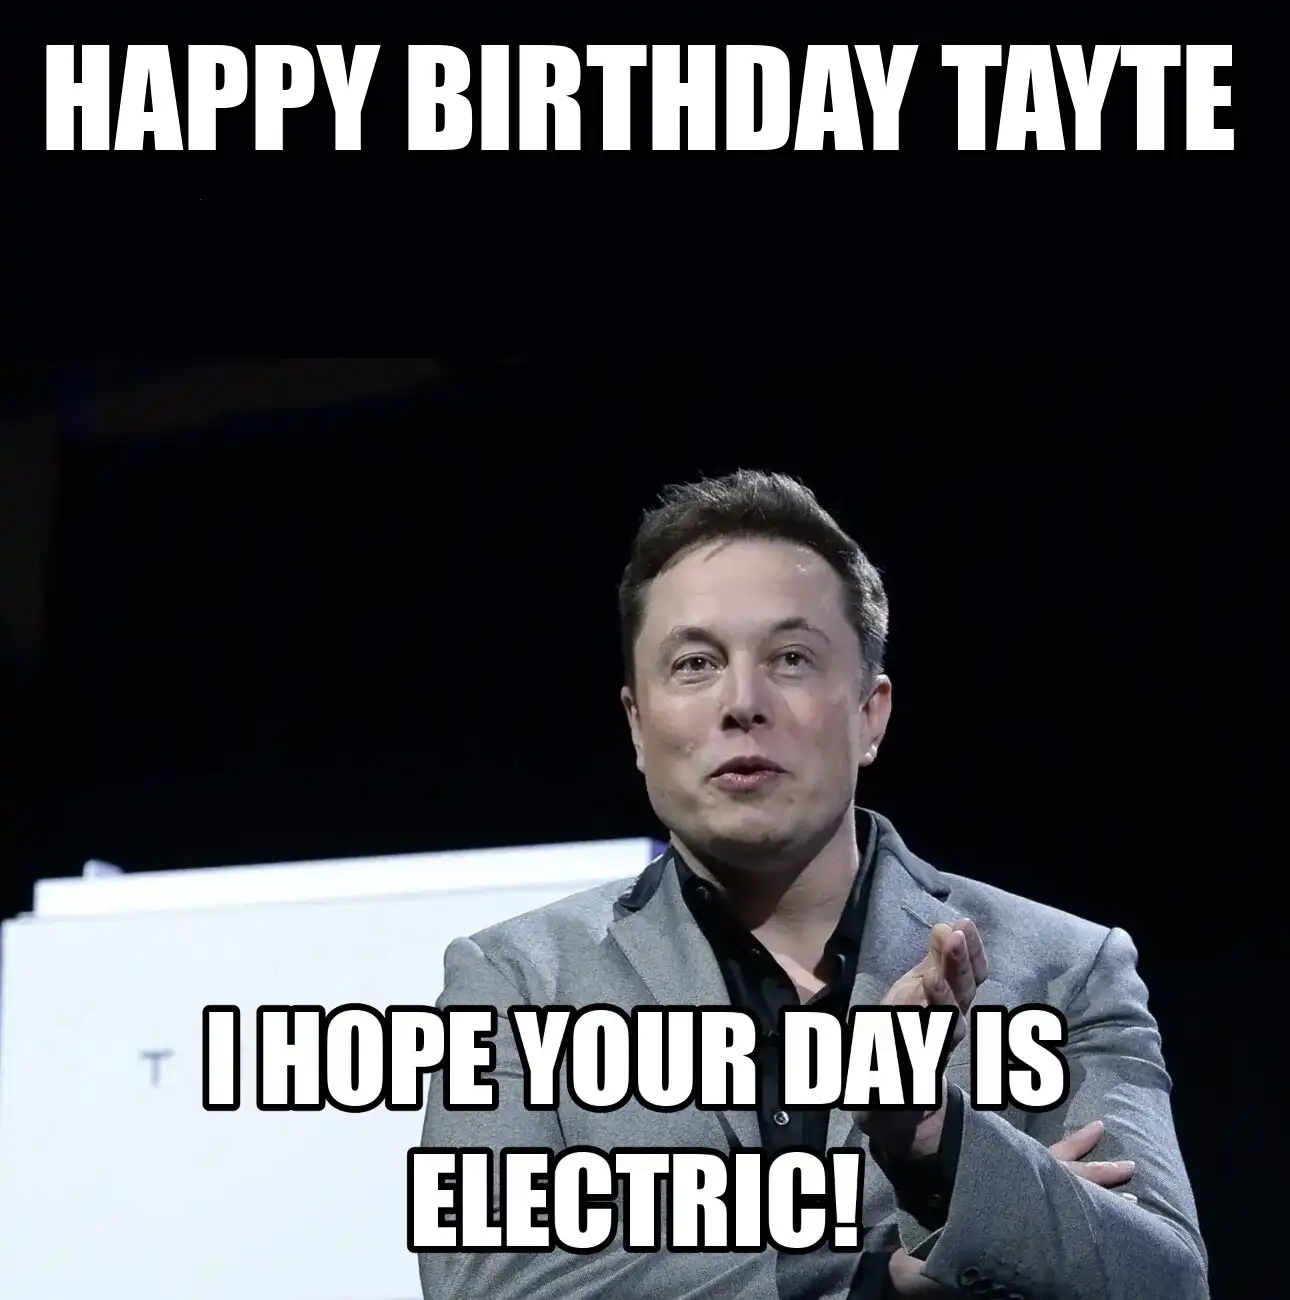 Happy Birthday Tayte I Hope Your Day Is Electric Meme